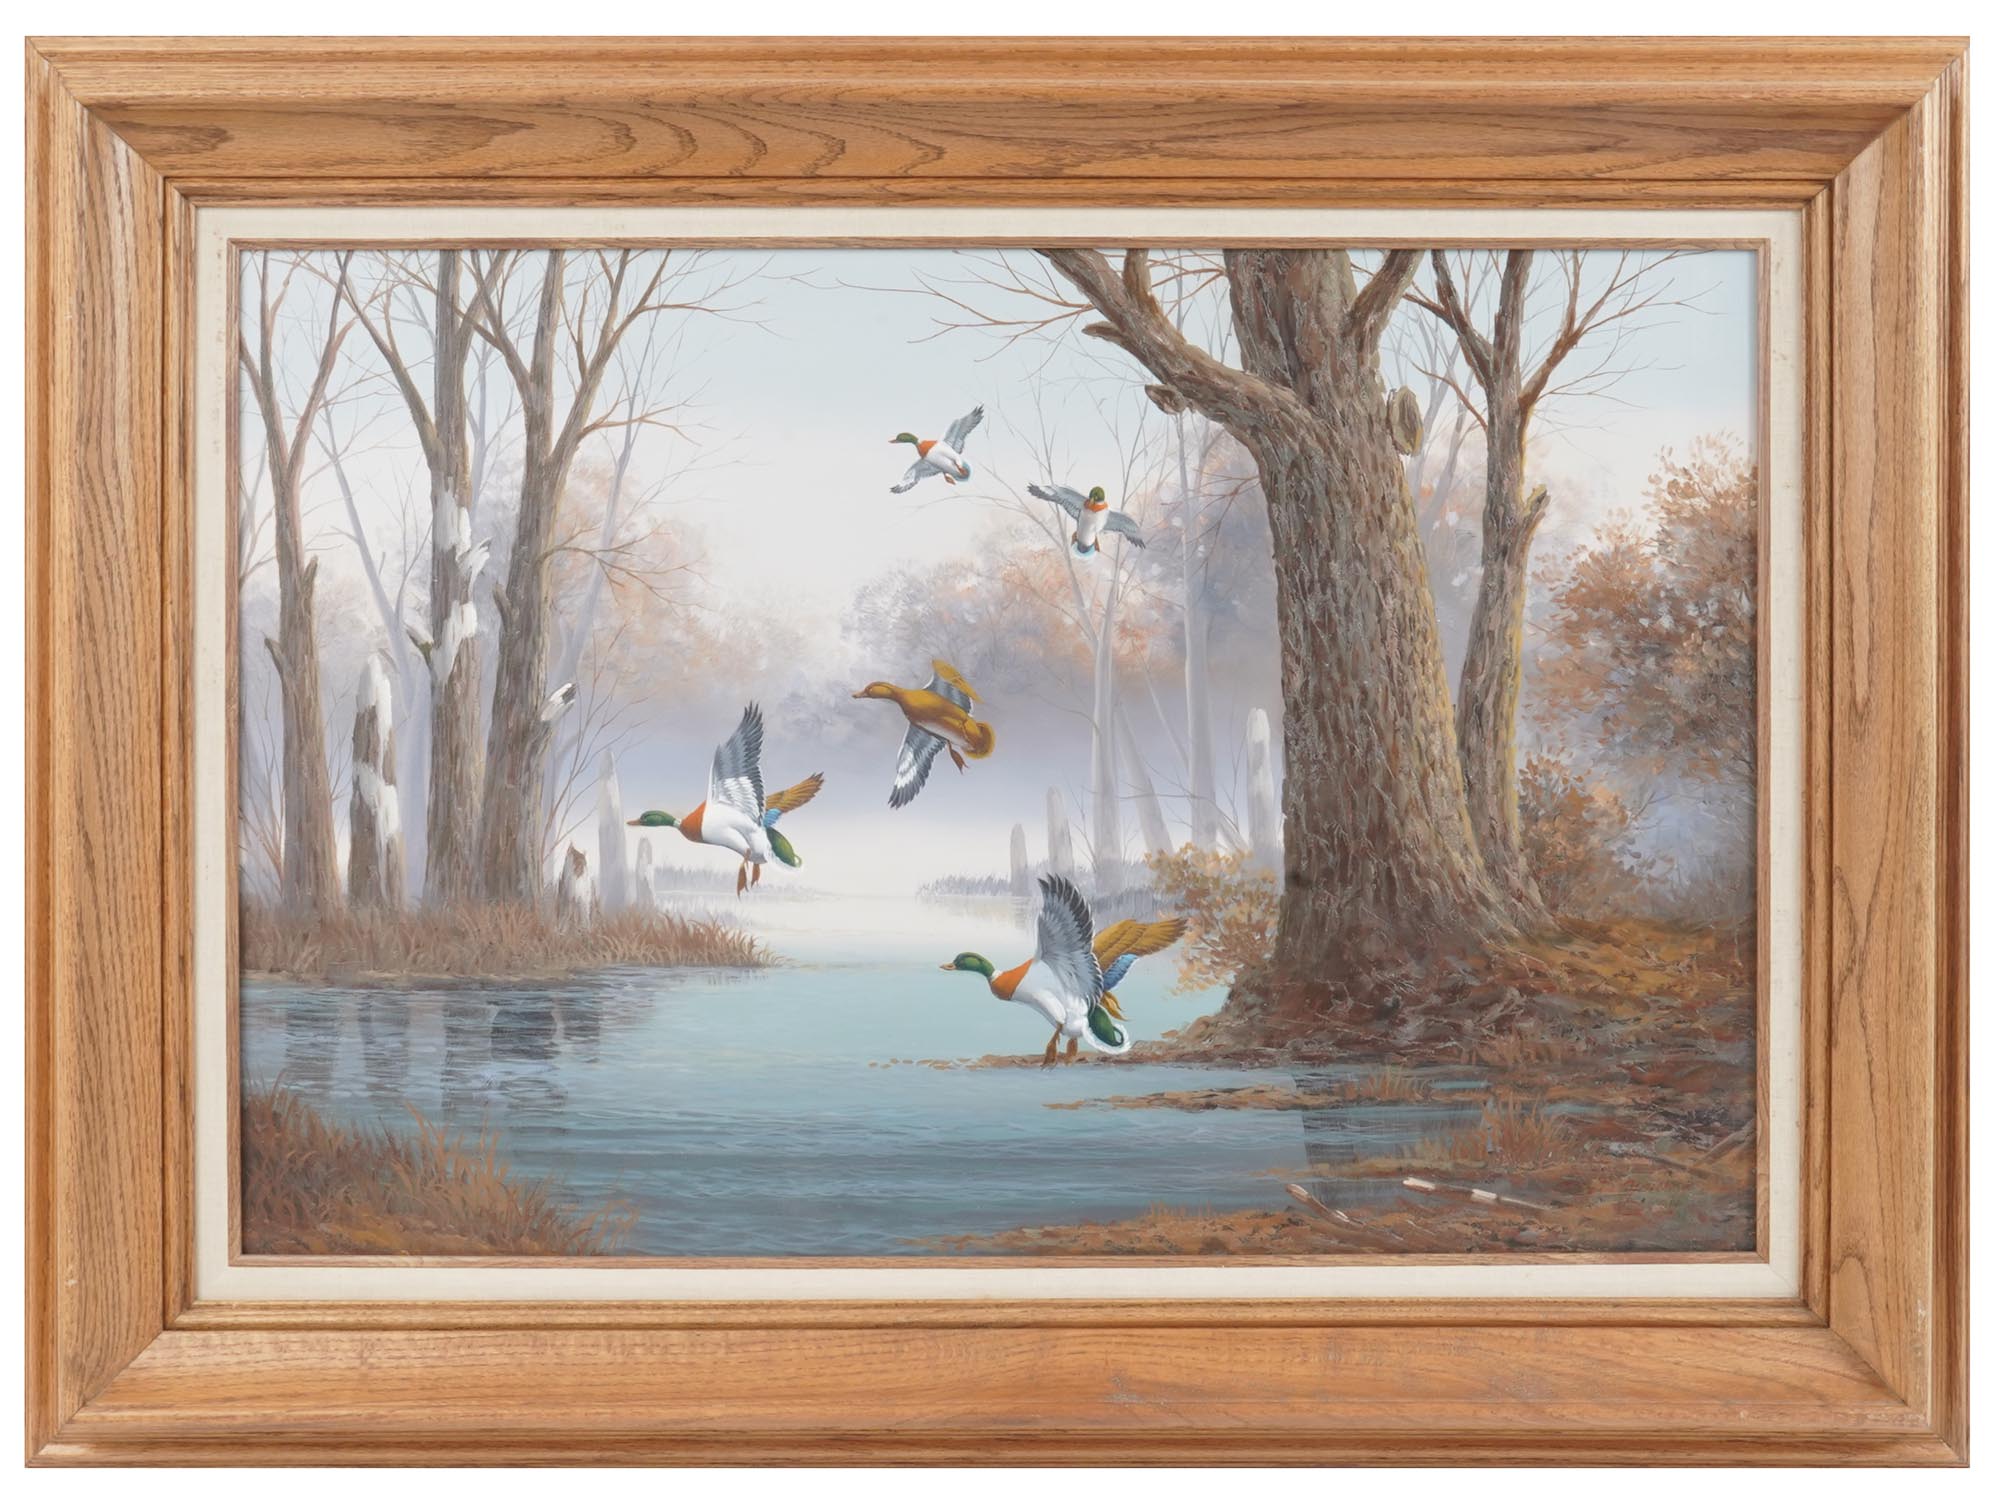 FRAMED RIVER LANDSCAPE PAINTING BY CHRIS YOUNG PIC-0